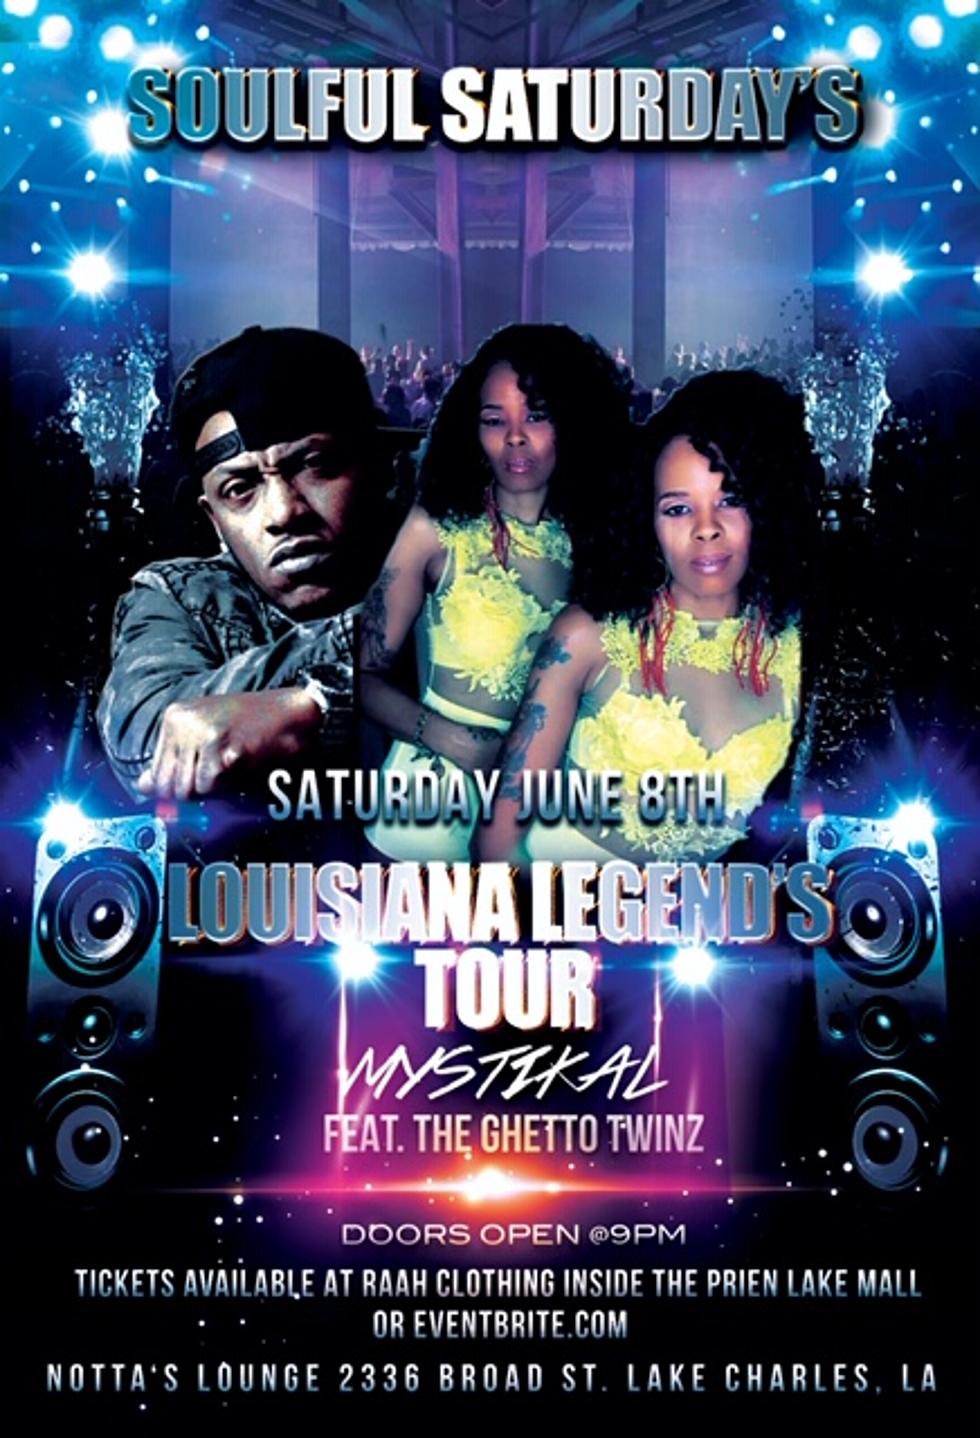 Don&#8217;t Miss The Legends Of Louisiana Tour Featuring Mystikal And Ghetto Twins